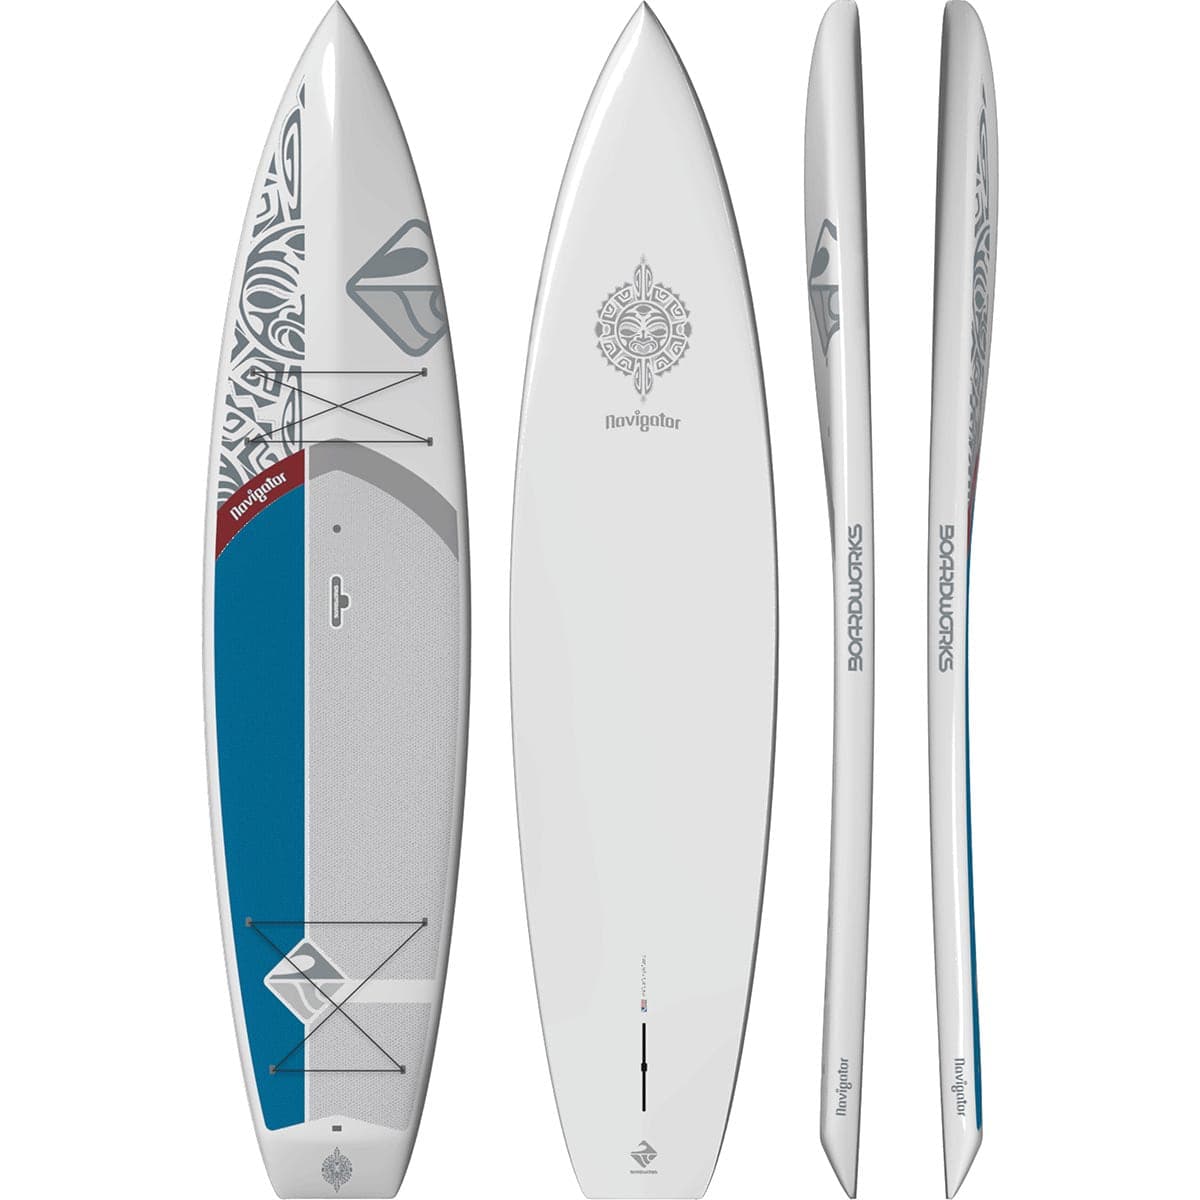 Featuring the Navigator 11'6 rigid sup manufactured by Boardworks shown here from a second angle.